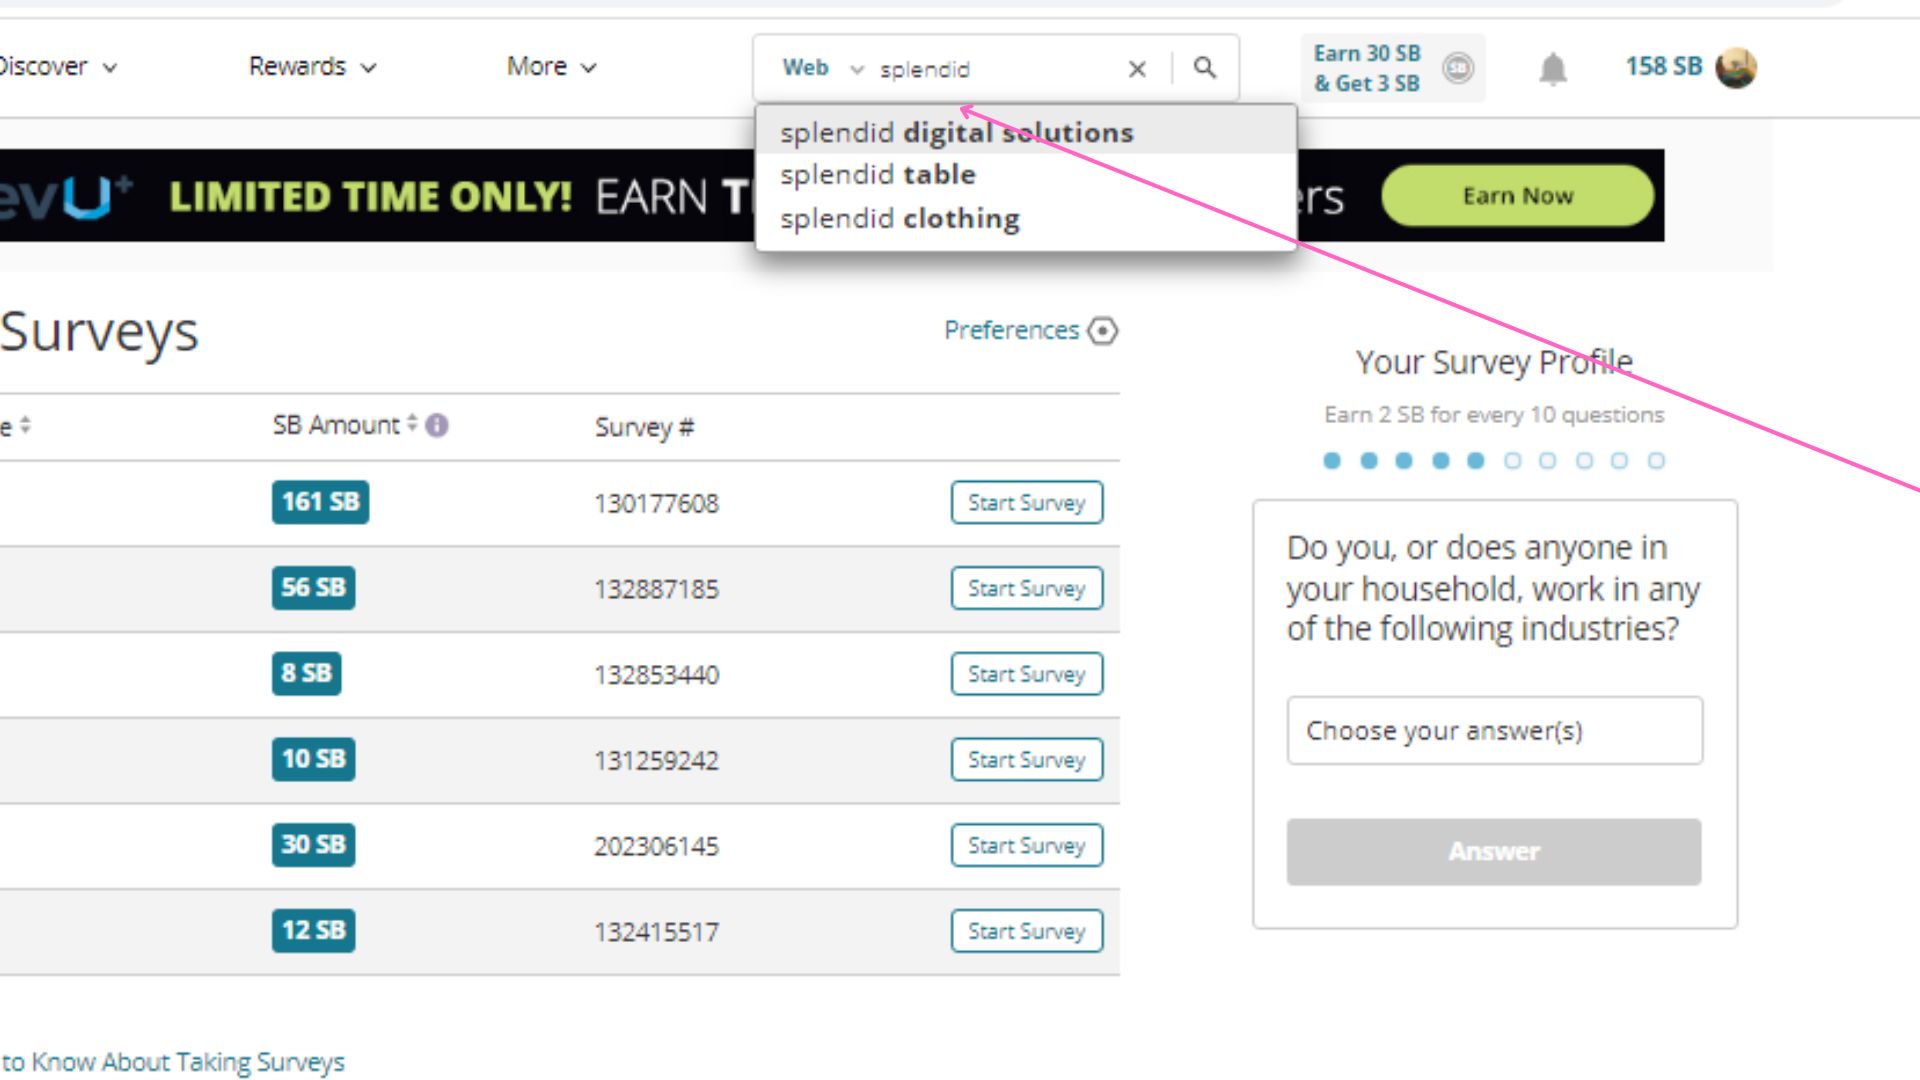 search the web and earn on swagbucks